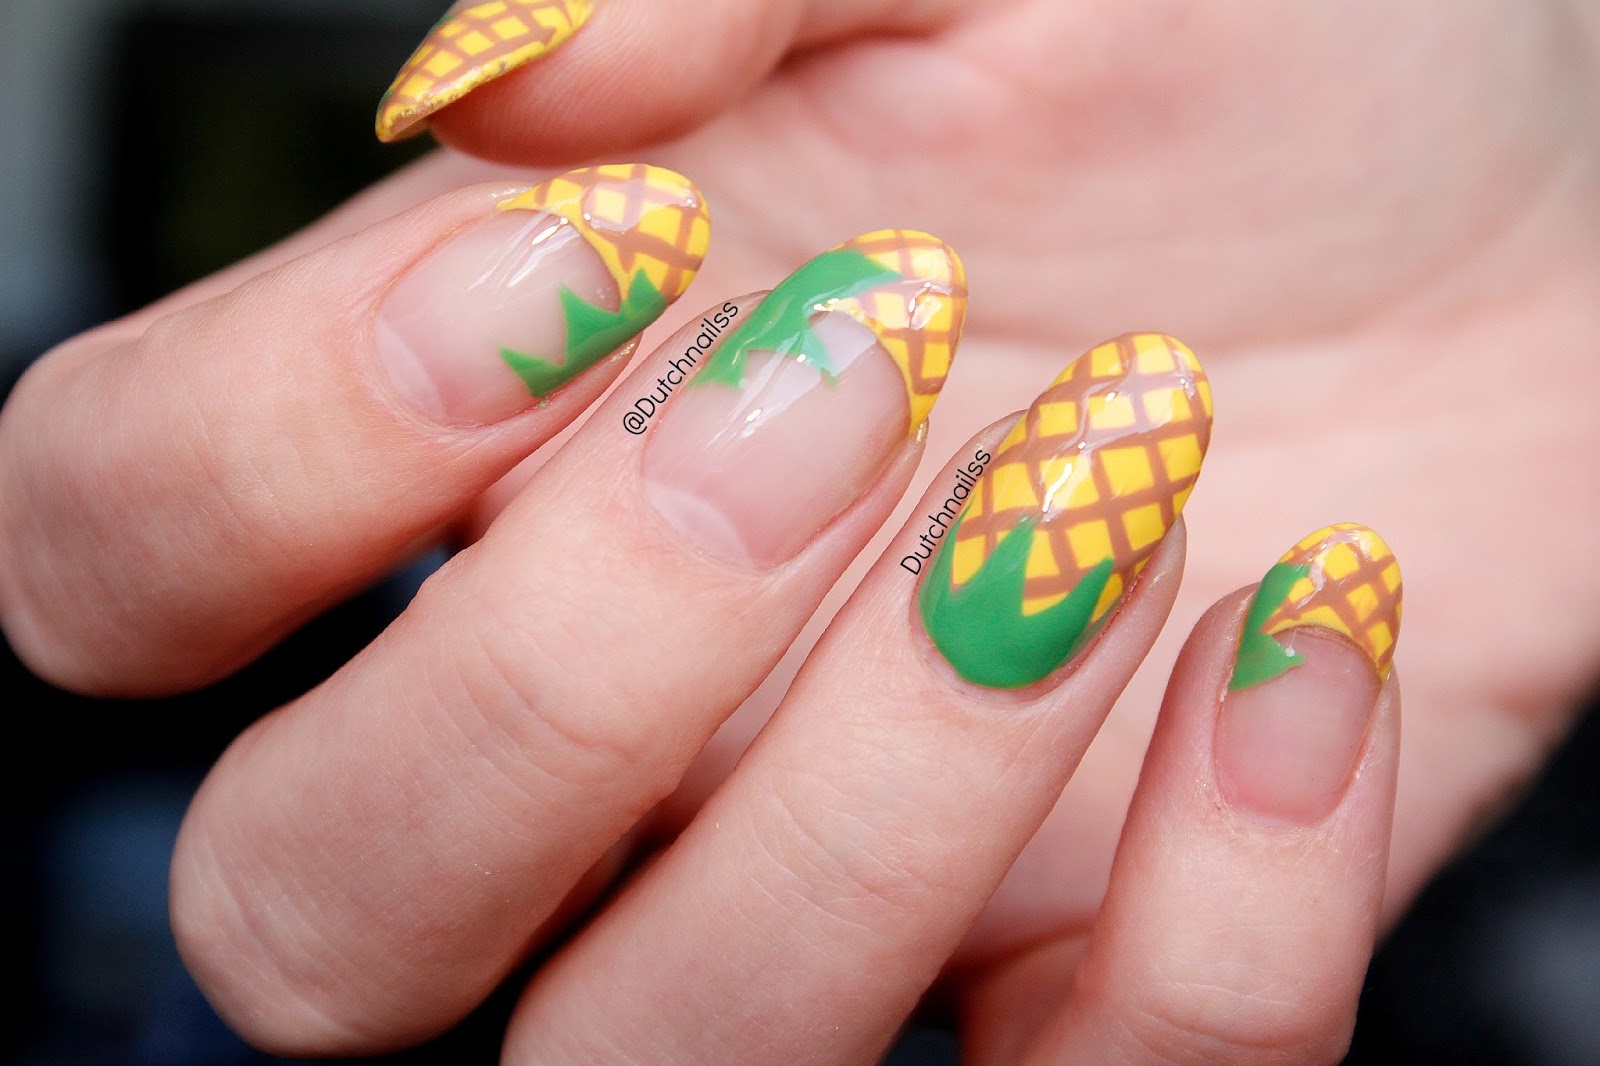 1. Summer Nail Art Ideas for August - wide 3